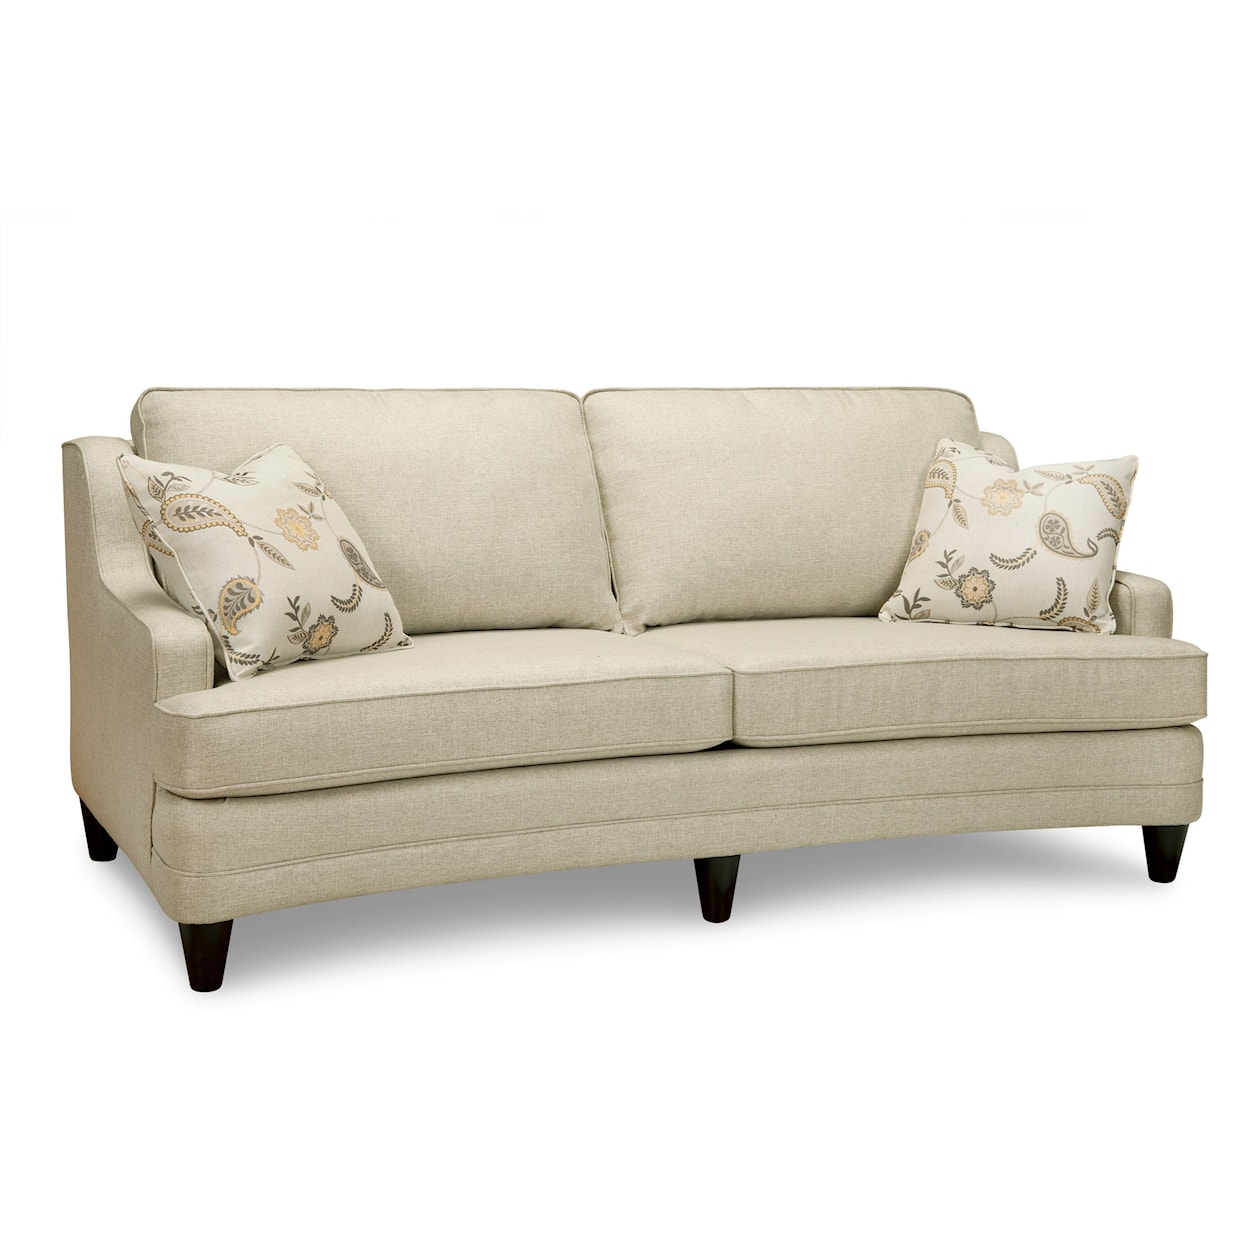 Superstyle 9691 Curved Condo Sofa